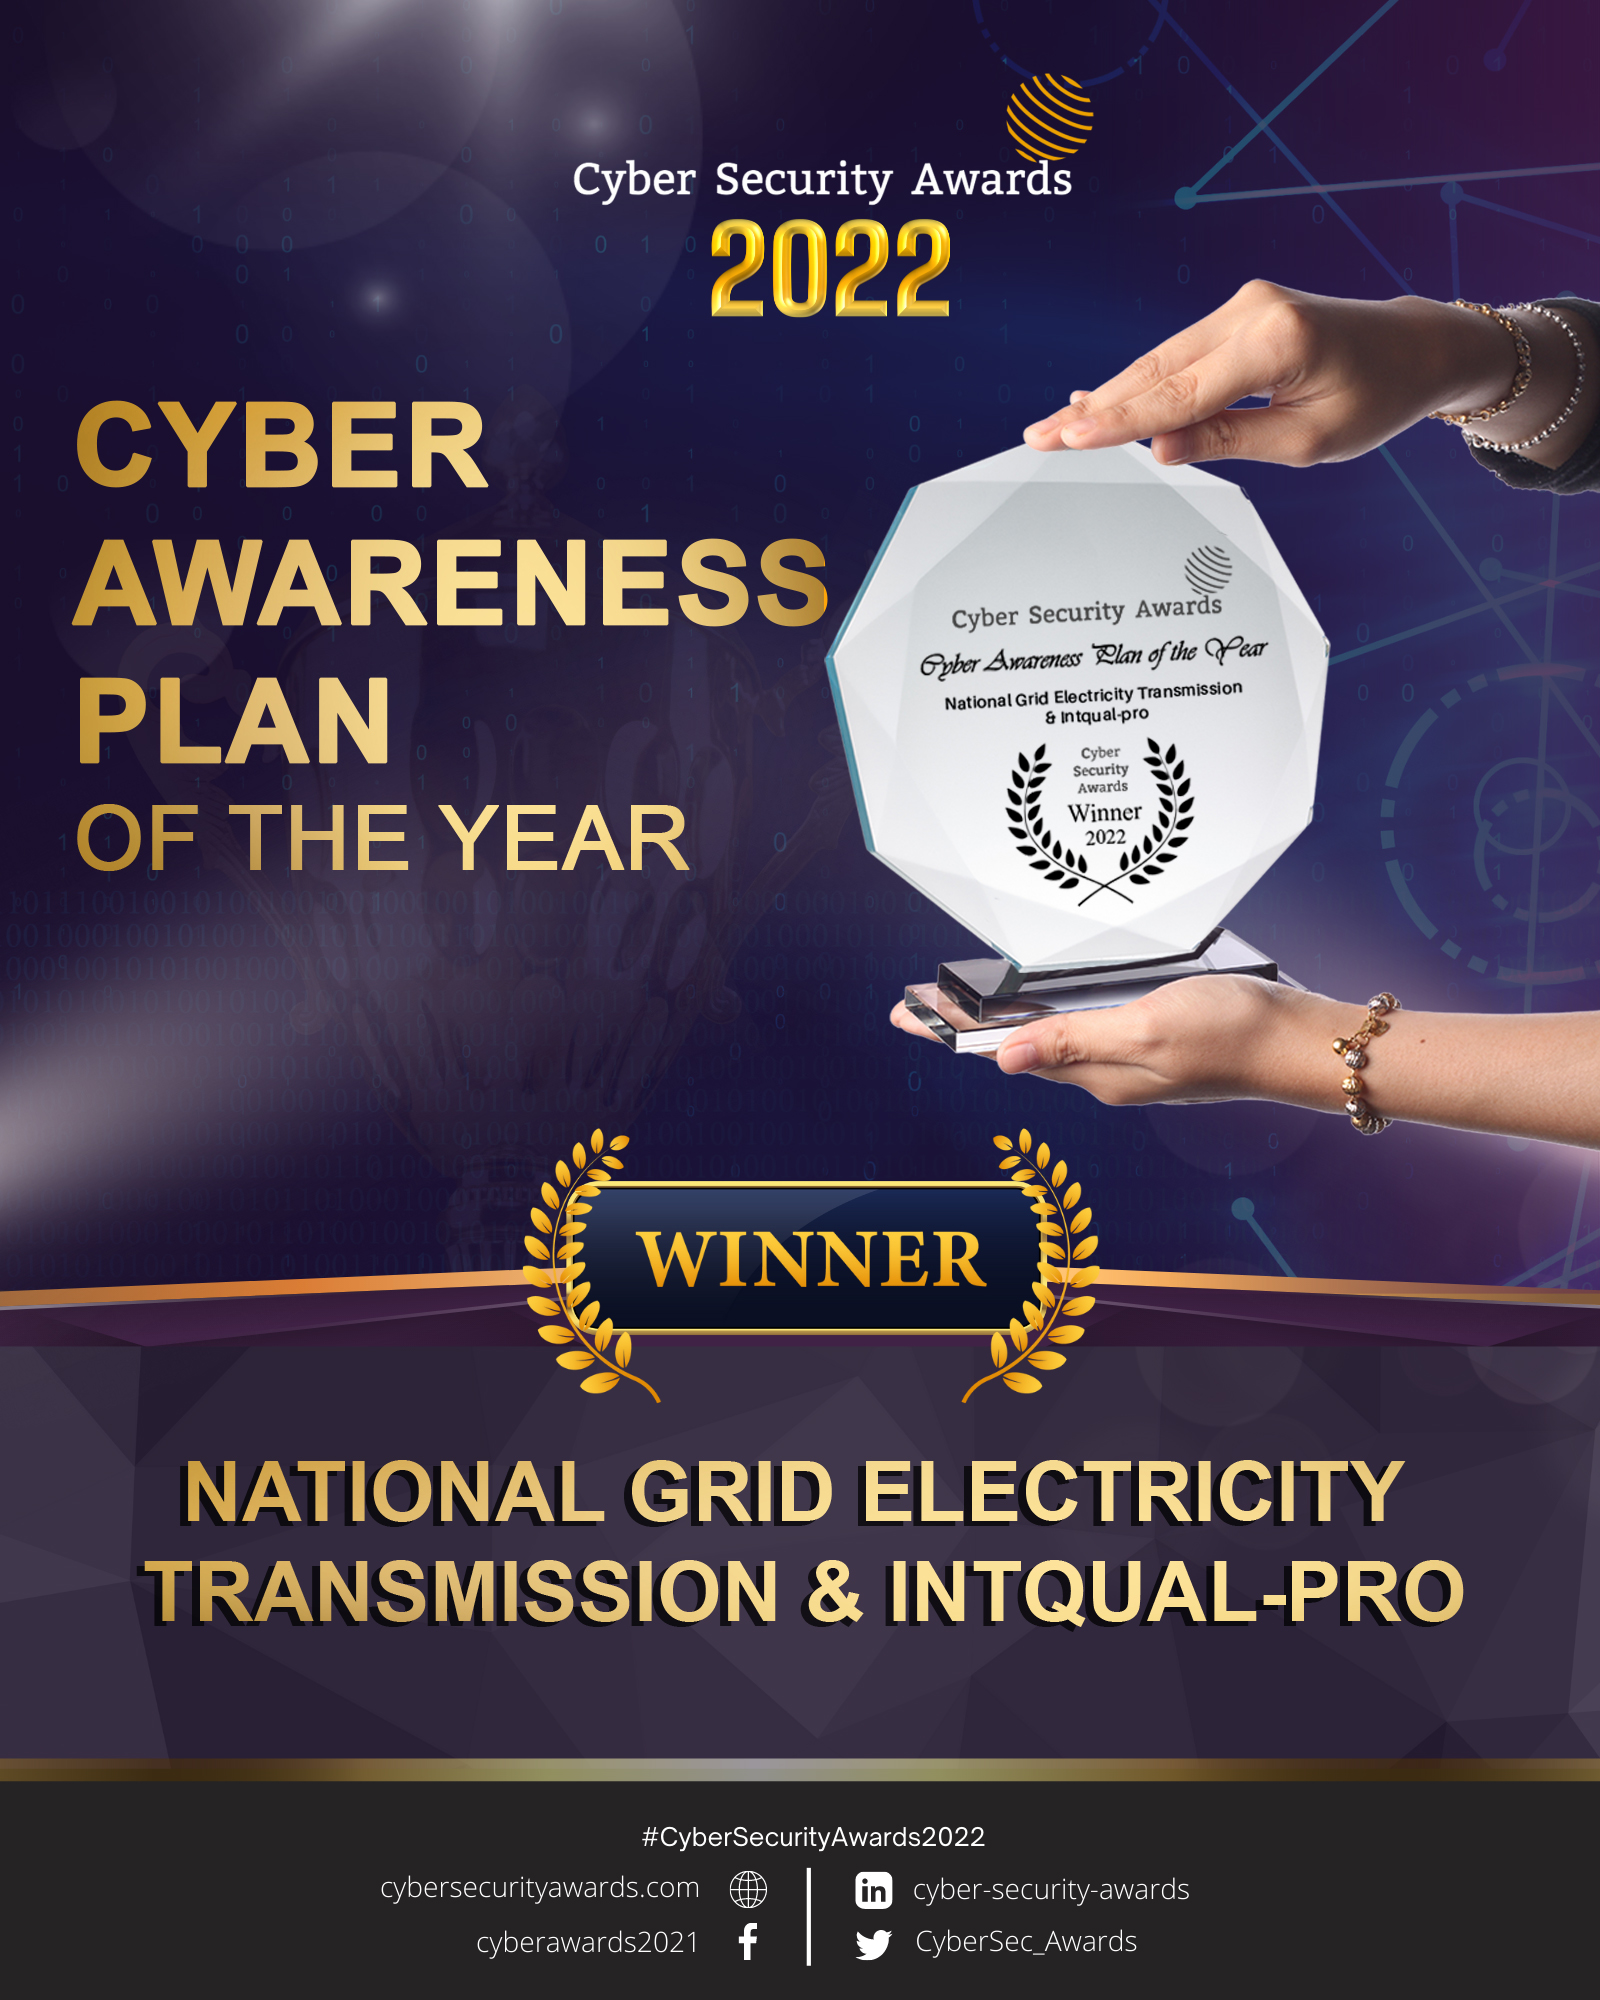 Intqual-pro win Cyber Awareness Plan of the Year 2022